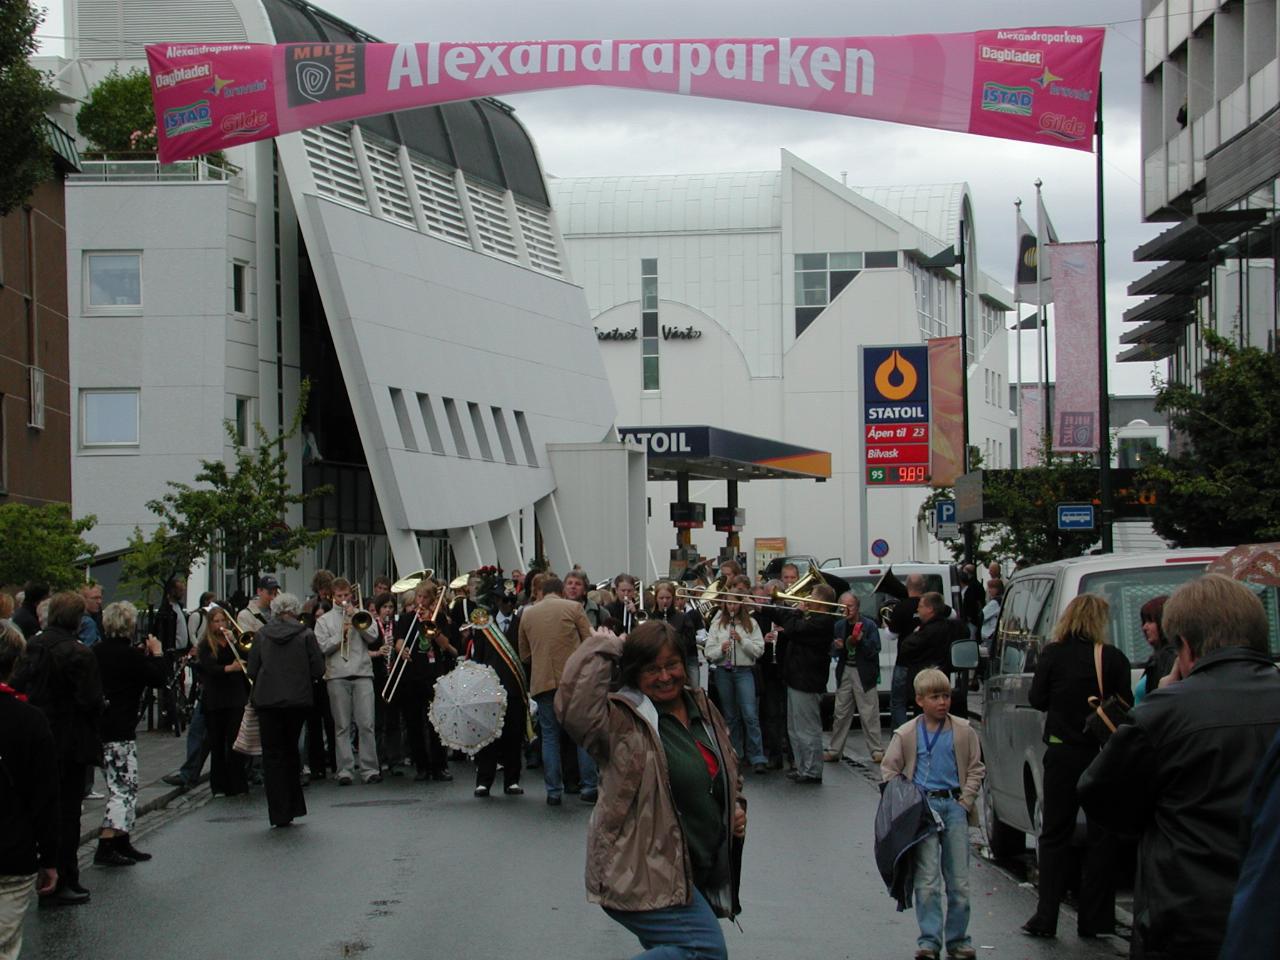 KPLU Viking Jazz: The Marching Band Parade forming up on the main street in Molde